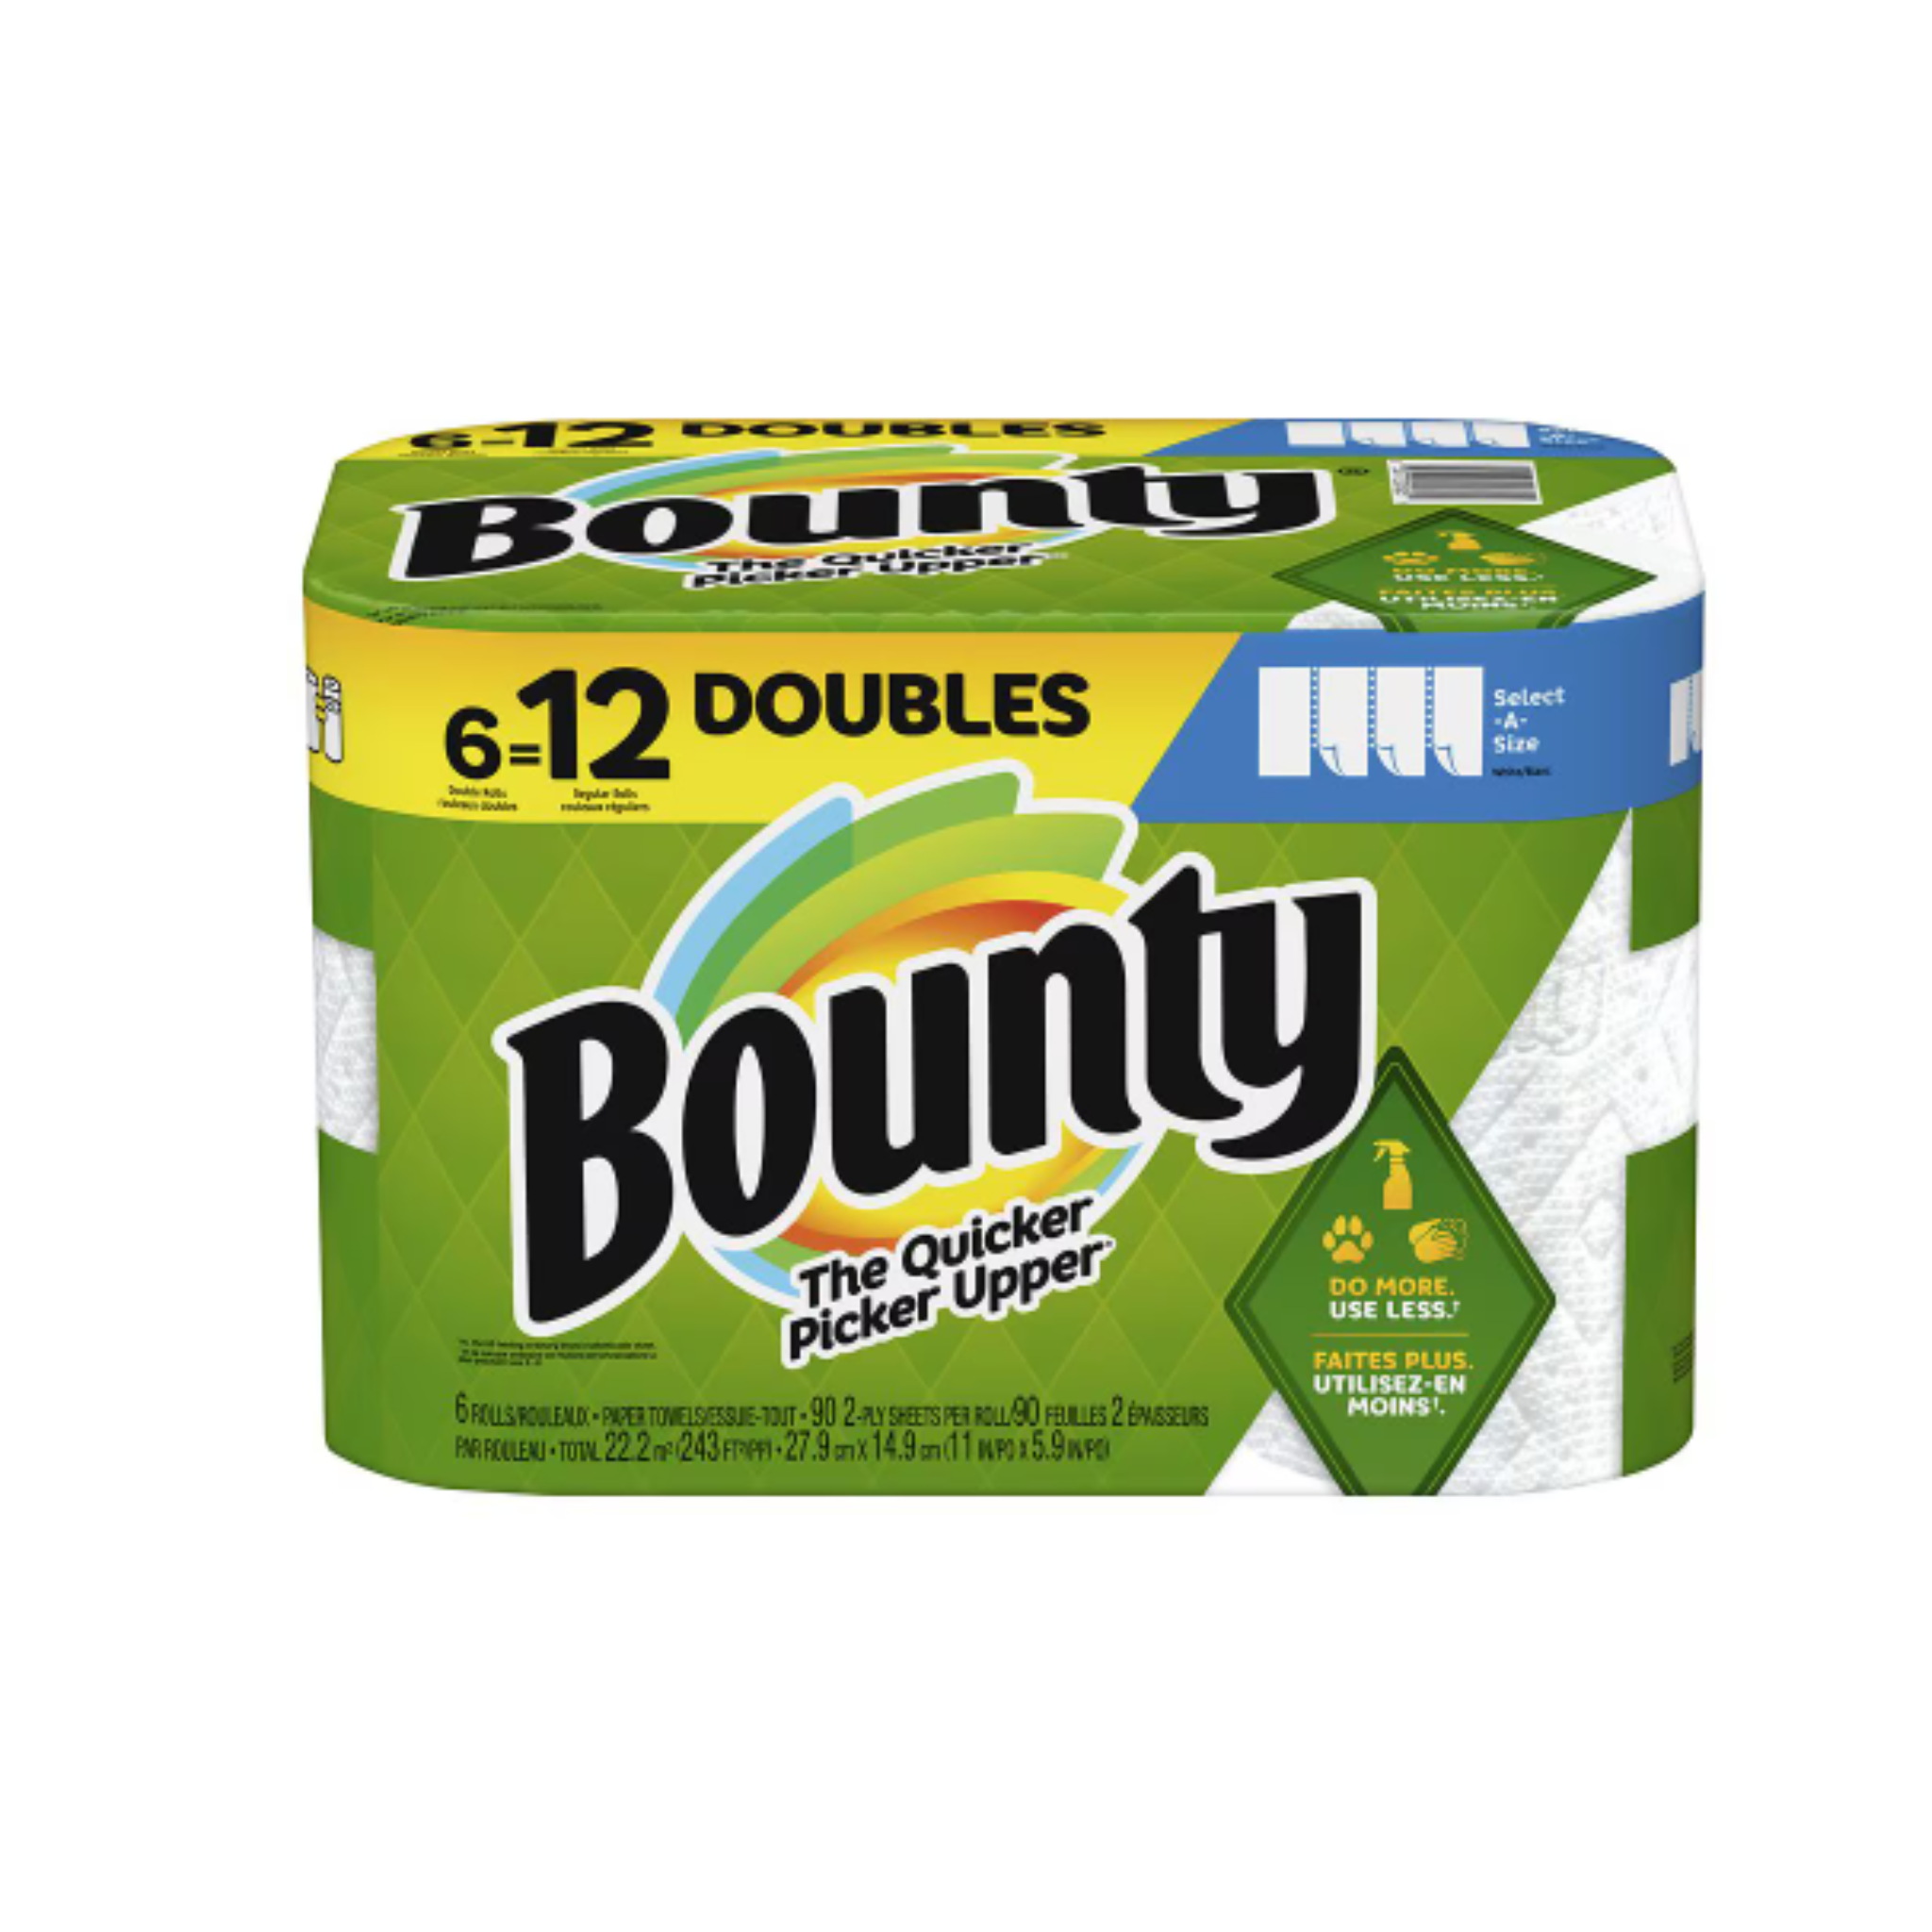 6-Count Bounty Select-A-Size Paper Towels (Double Rolls)